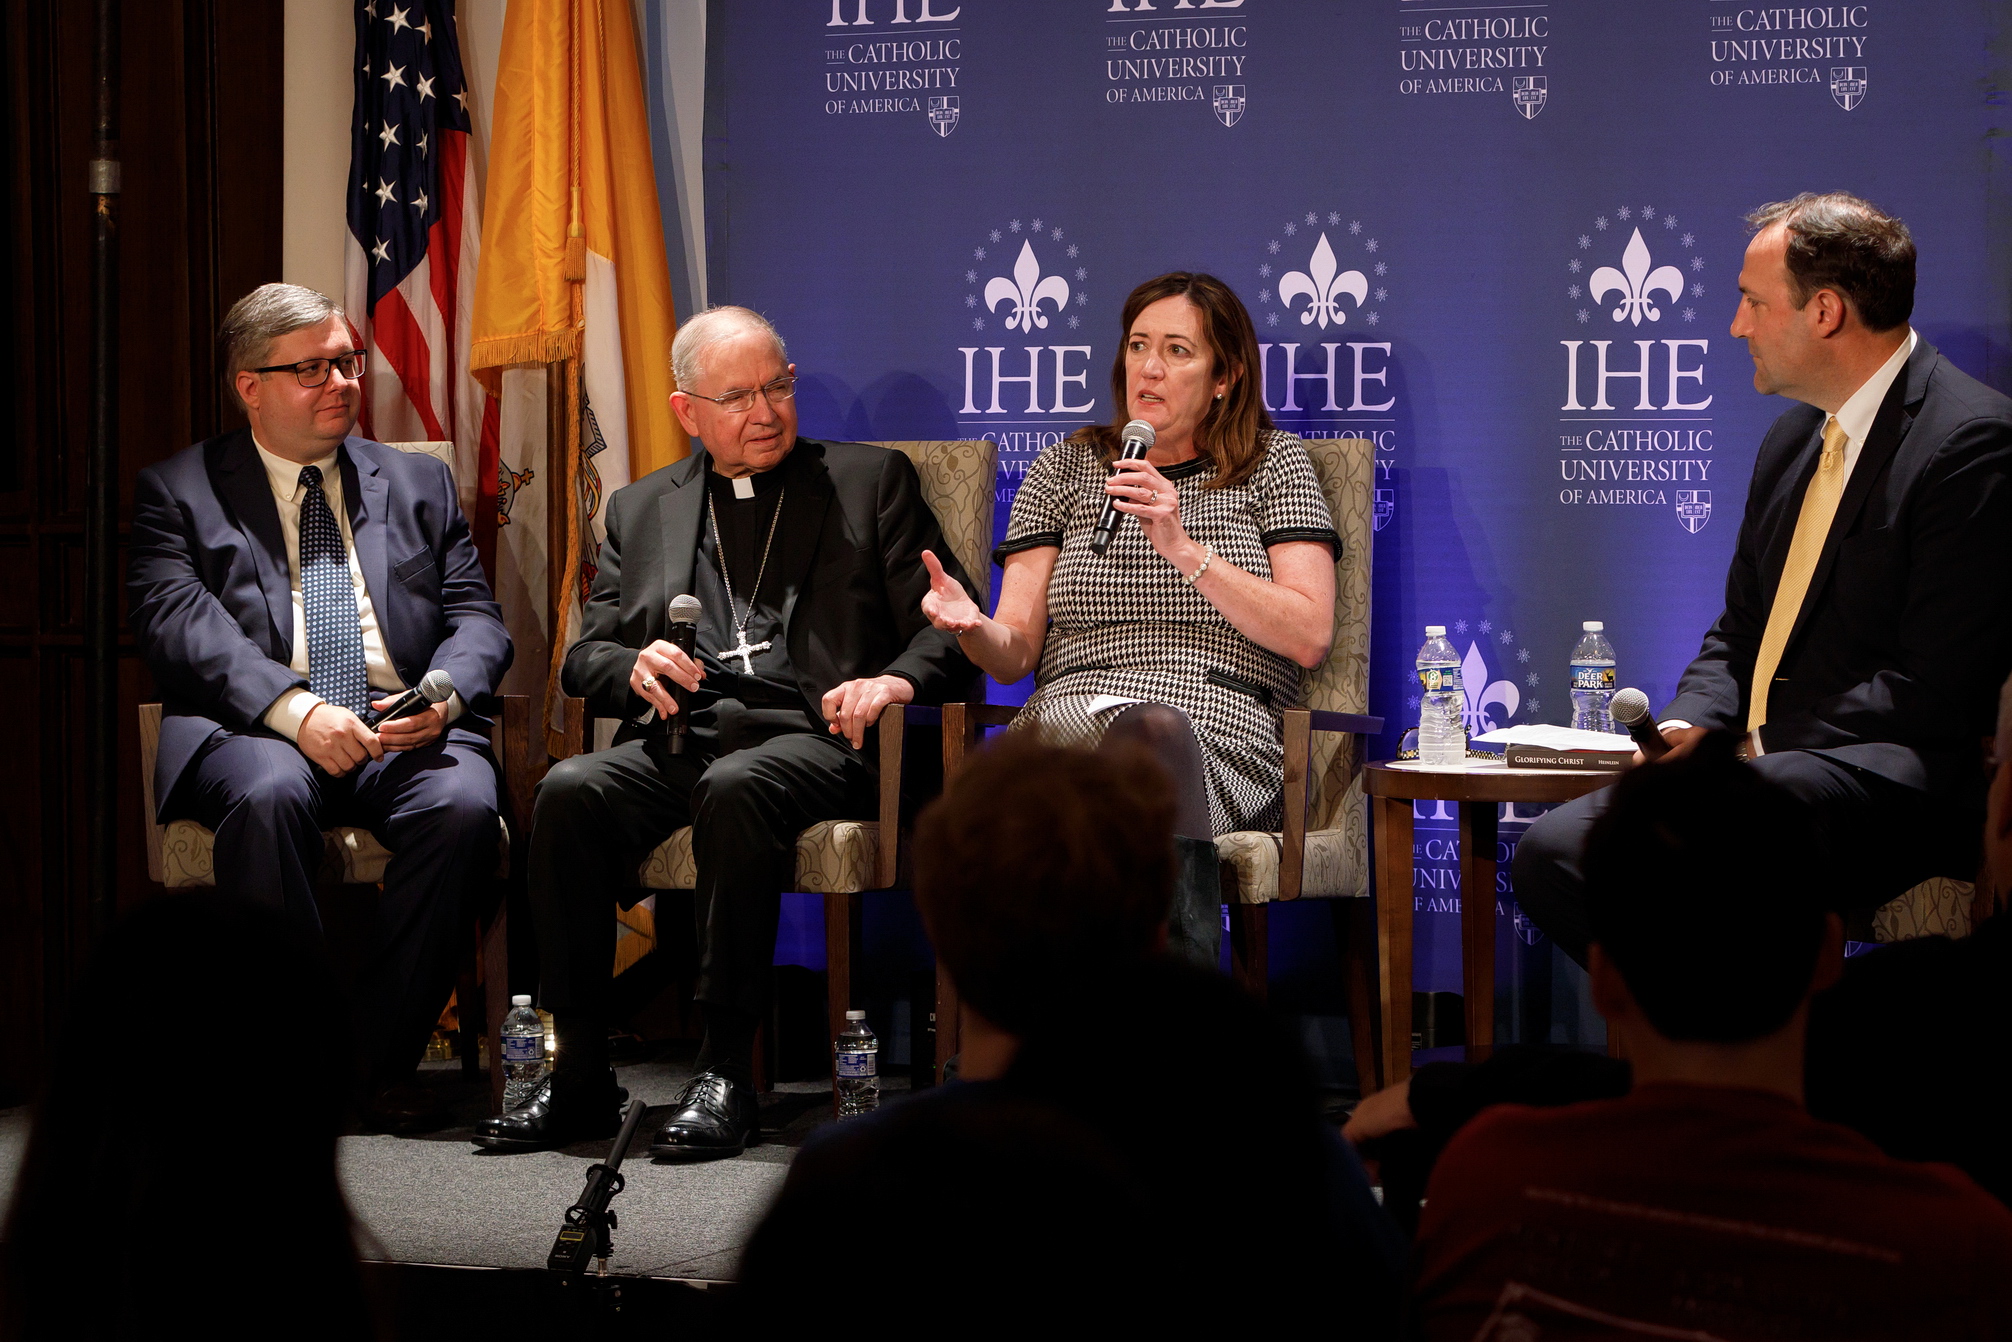 Left to right: Michael Heinlein, B.A. 2008, Archbishop José Gomez of Los Angeles, Mary FioRito, and Stephen White, M.A. 2014, discuss Cardinal Francis George’s legacy.